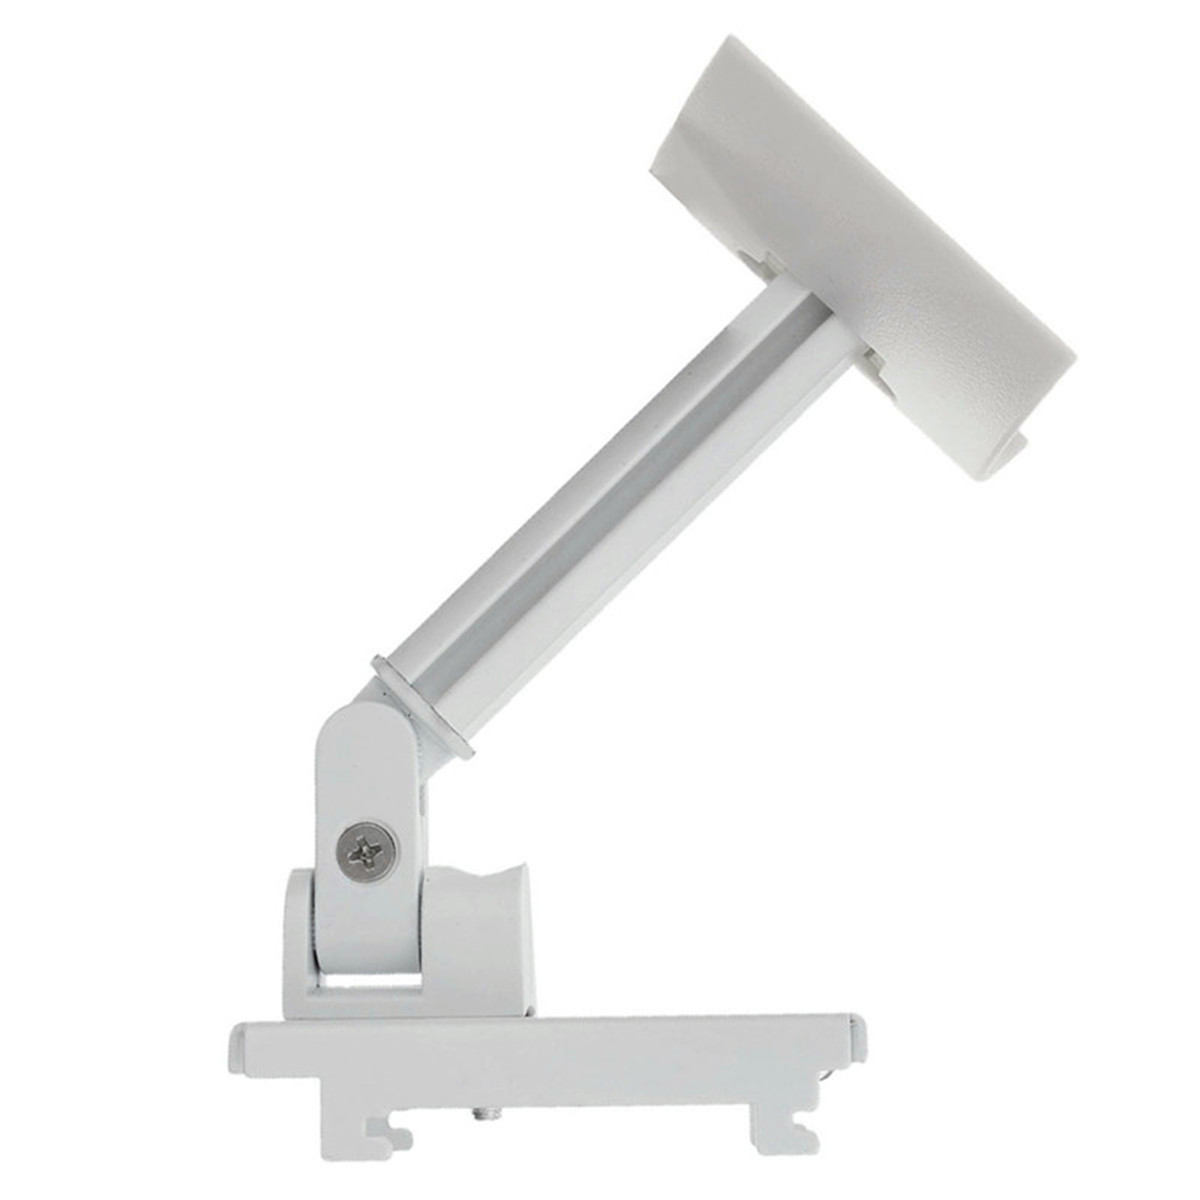 LEORY-Universal-Stainless-Steel-Wall-Mount-Speaker-Bracket-Speaker-Holder-Mount-Stand-with-Mount-Acc-1688860